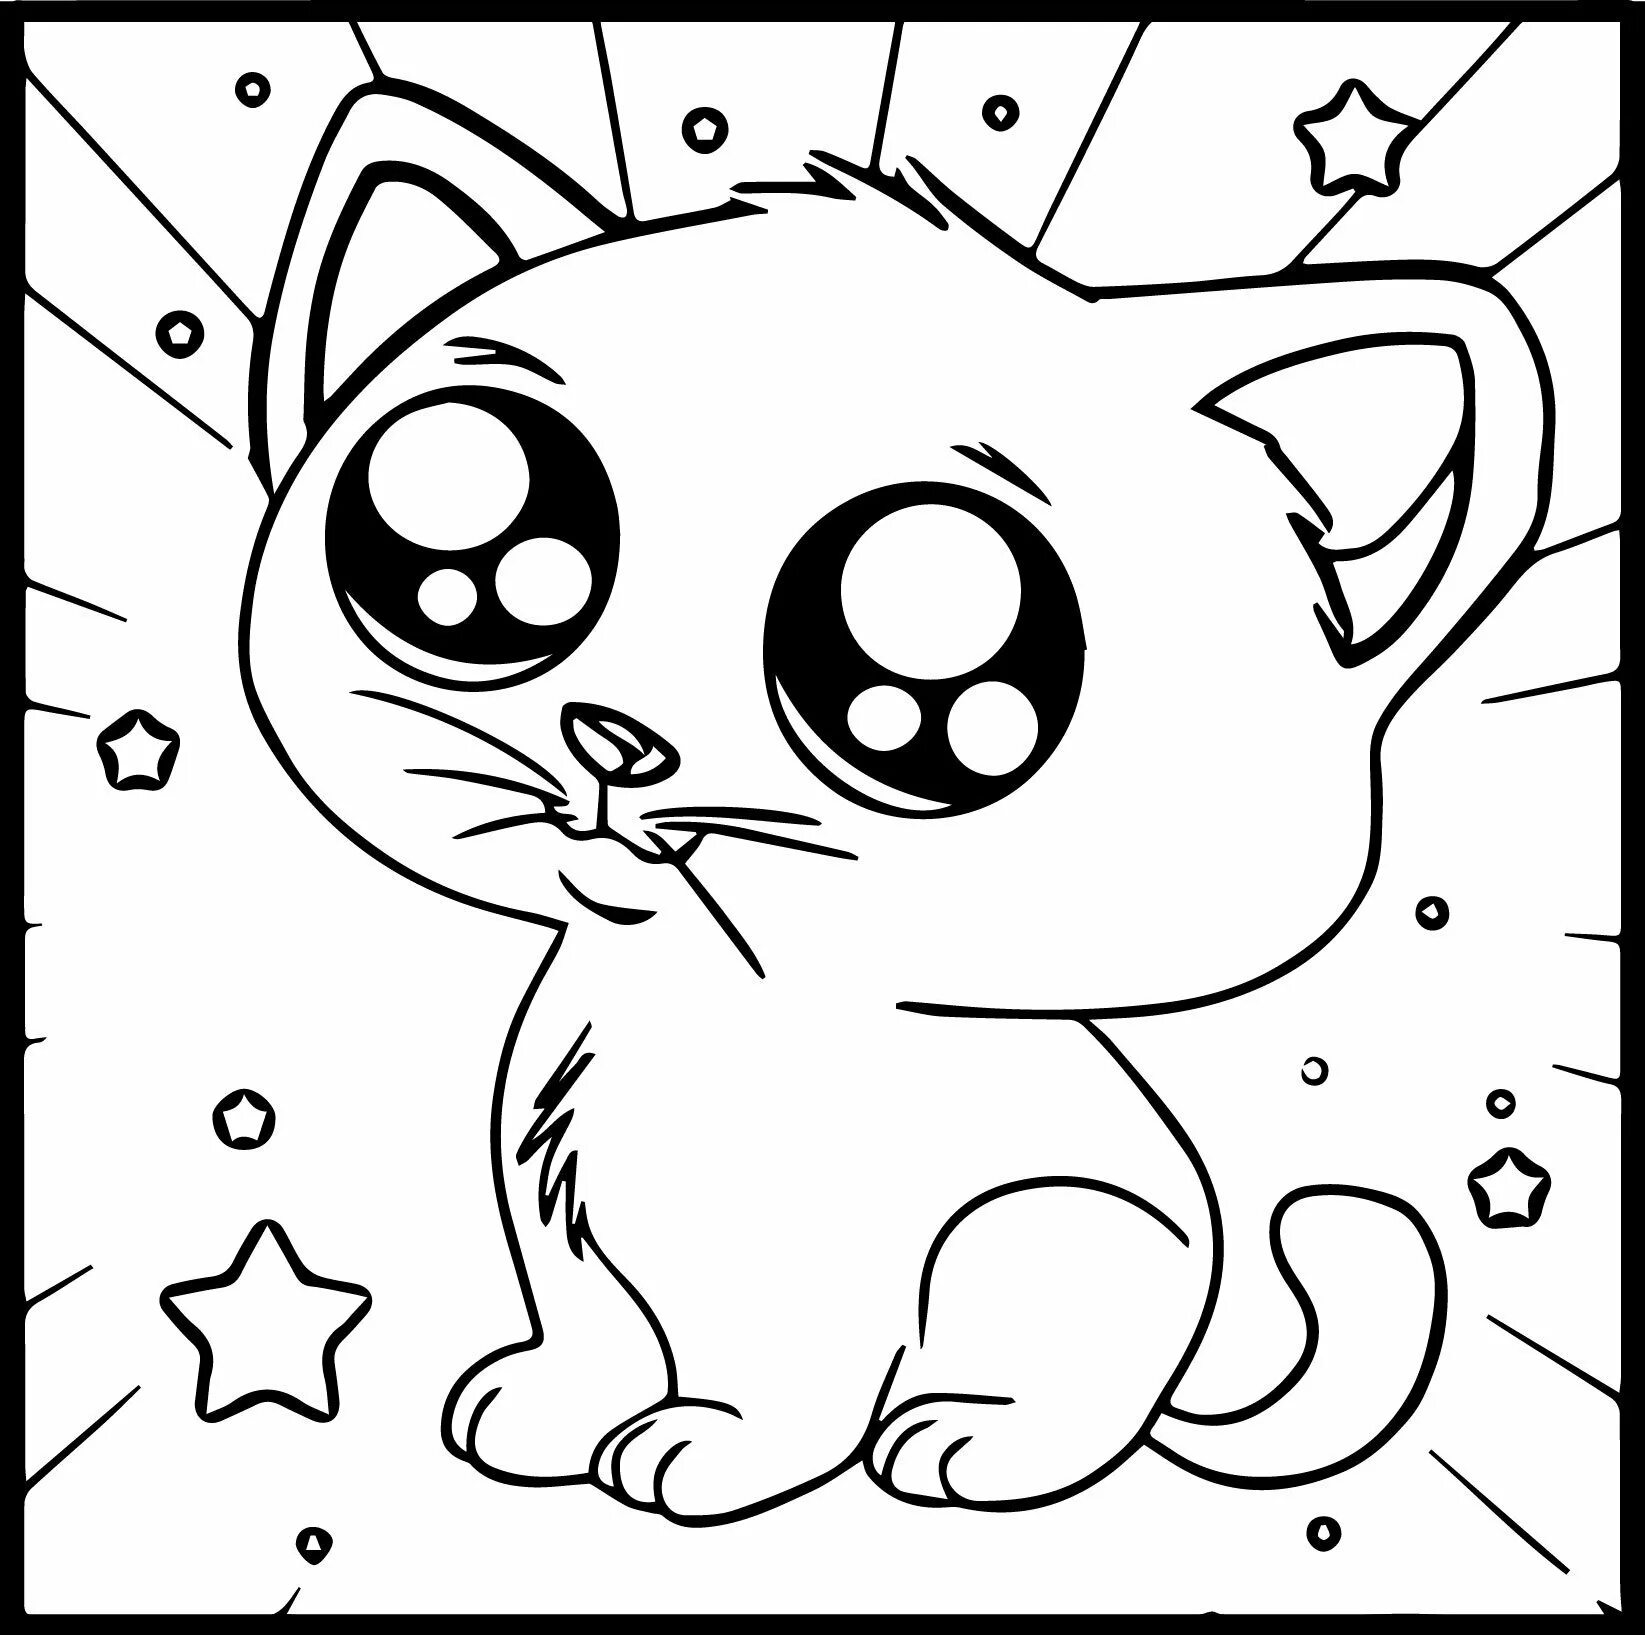 Beautiful and funny cat coloring pages for kids